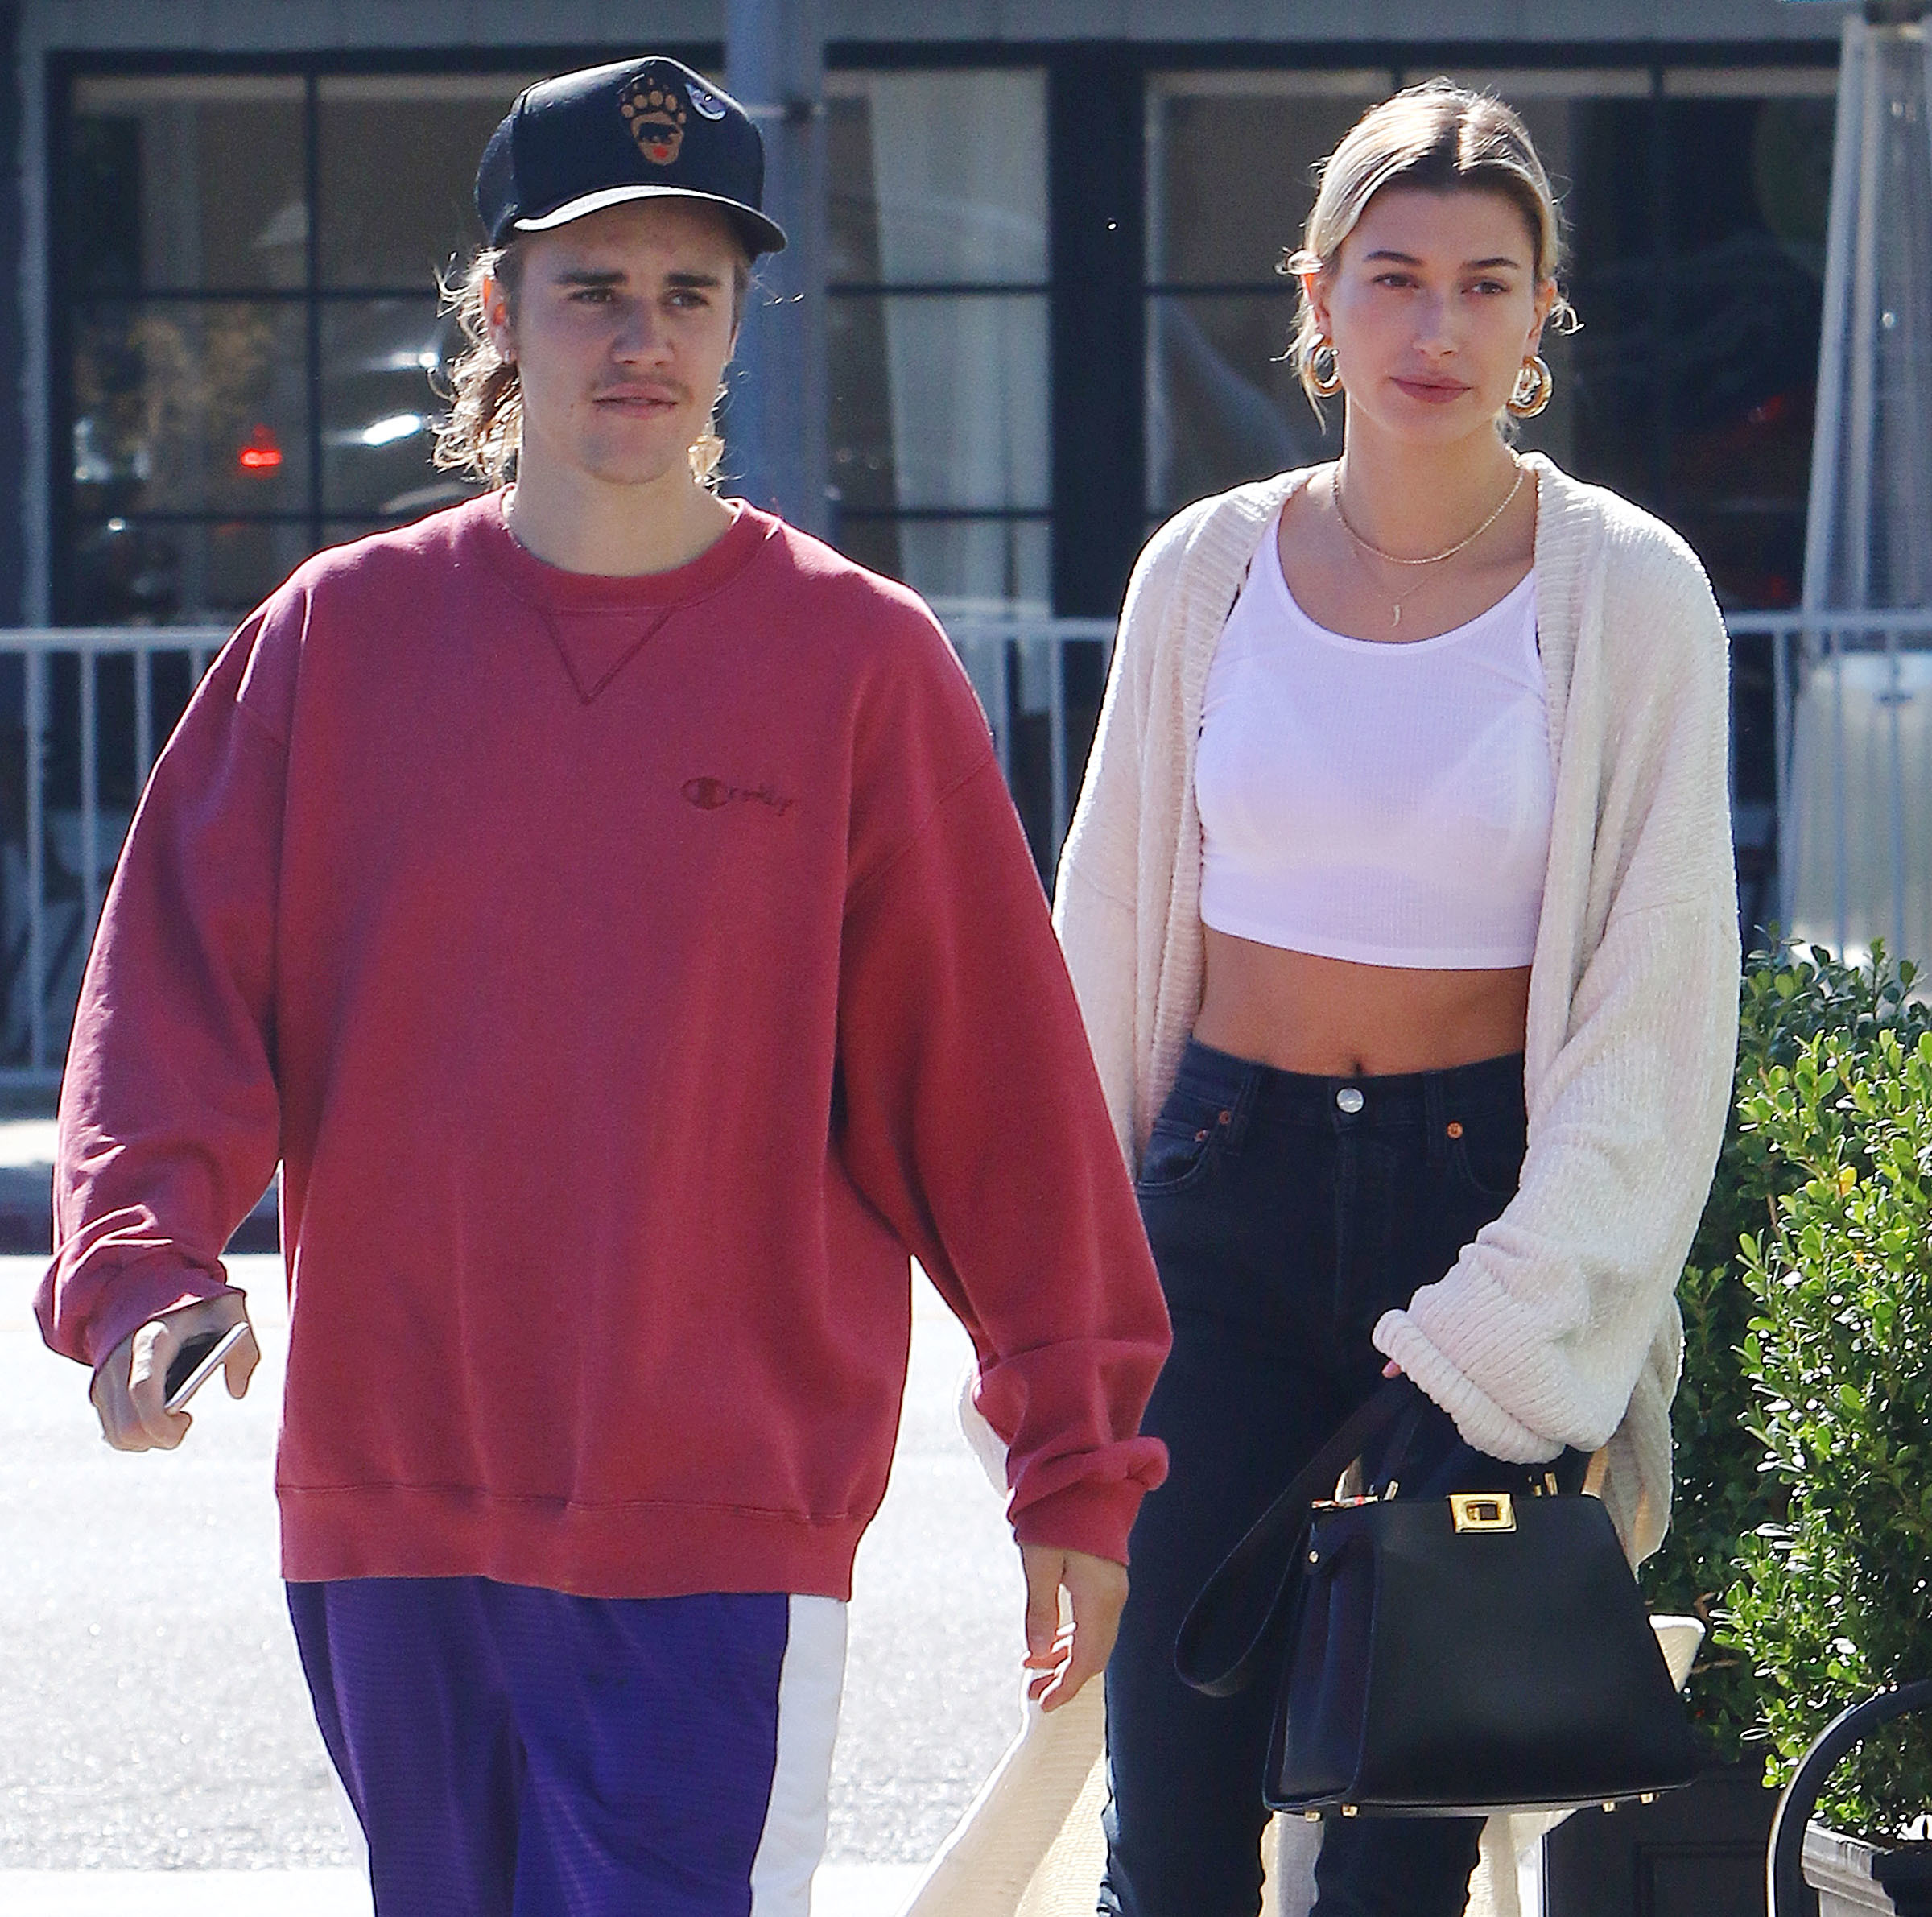 <p><a href="https://www.wonderwall.com/celebrity/profiles/overview/justin-bieber-1240.article">Justin Bieber</a> and wife Hailey Bieber met back in 2009 when she was 13 and he was 15 after her uncle, Alec Baldwin, got her family tickets to see the singer perform on "Today." "I was never a superfan, of him or of anyone," the former <a href="https://www.wonderwall.com/celebrity/profiles/overview/hailey-baldwin-1578.article">Hailey Baldwin</a> told Vogue in 2019. "It was never that crazed, screaming thing. I didn't think about it in any kind of way except for the fact that he was cute. Everybody had a crush on him. But for the first few years we had a weird age gap." Hailey's dad, actor Stephen Baldwin, and Justin's mom, Pattie Mallette -- both born-again Christians -- became friends after that "Today" show concert. (Hailey later revealed that Stephen invited Pattie and Justin to have dinner with their family and go bowling the next day.) It was years later that Justin and Hailey got close after they saw each other at Hillsong church services in New York City. "One day Justin walked into Hillsong and was like, 'Hey, you got older.' I was like, 'Yeah, what's up?" Hailey told Vogue. They ended up <a href="https://www.wonderwall.com/celebrity/couples/justin-bieber-hailey-baldwin-romance-retrospective-dating-relationship-timeline-3016794.gallery?photoId=174225">dating briefly in 2015 and 2016</a> and rekindled things three years later -- this time for good. During a February 2020 appearance on "The Tonight Show With Jimmy Fallon," Hailey revealed what sparked them to reconnect. "Last time I was [on this show], we did this little party trick where I opened a Corona bottle with my teeth," Hailey explained. "The next morning -- after the interview had aired -- I got a certain phone call from a certain someone and it was a little like, 'Hey, how are you? I saw you on 'Jimmy Fallon' last night. You were looking really good. I loved that trick that you did, I had no idea that you can do that. It was so cool.' Cut to, I'm now married to that certain someone." Hailey <a href="https://www.wonderwall.com/news/its-true-justin-bieber-did-marry-hailey-baldwin-nyc-courthouse-without-prenup-3016655.article">officially became Mrs. Bieber</a> when they eloped in September 2018 and they celebrated their love again with a <a href="https://www.wonderwall.com/celebrity/justin-bieber-and-hailey-biebers-wedding-all-details-we-know-so-far-3021213.article">formal religious wedding</a> in September 2019.</p>